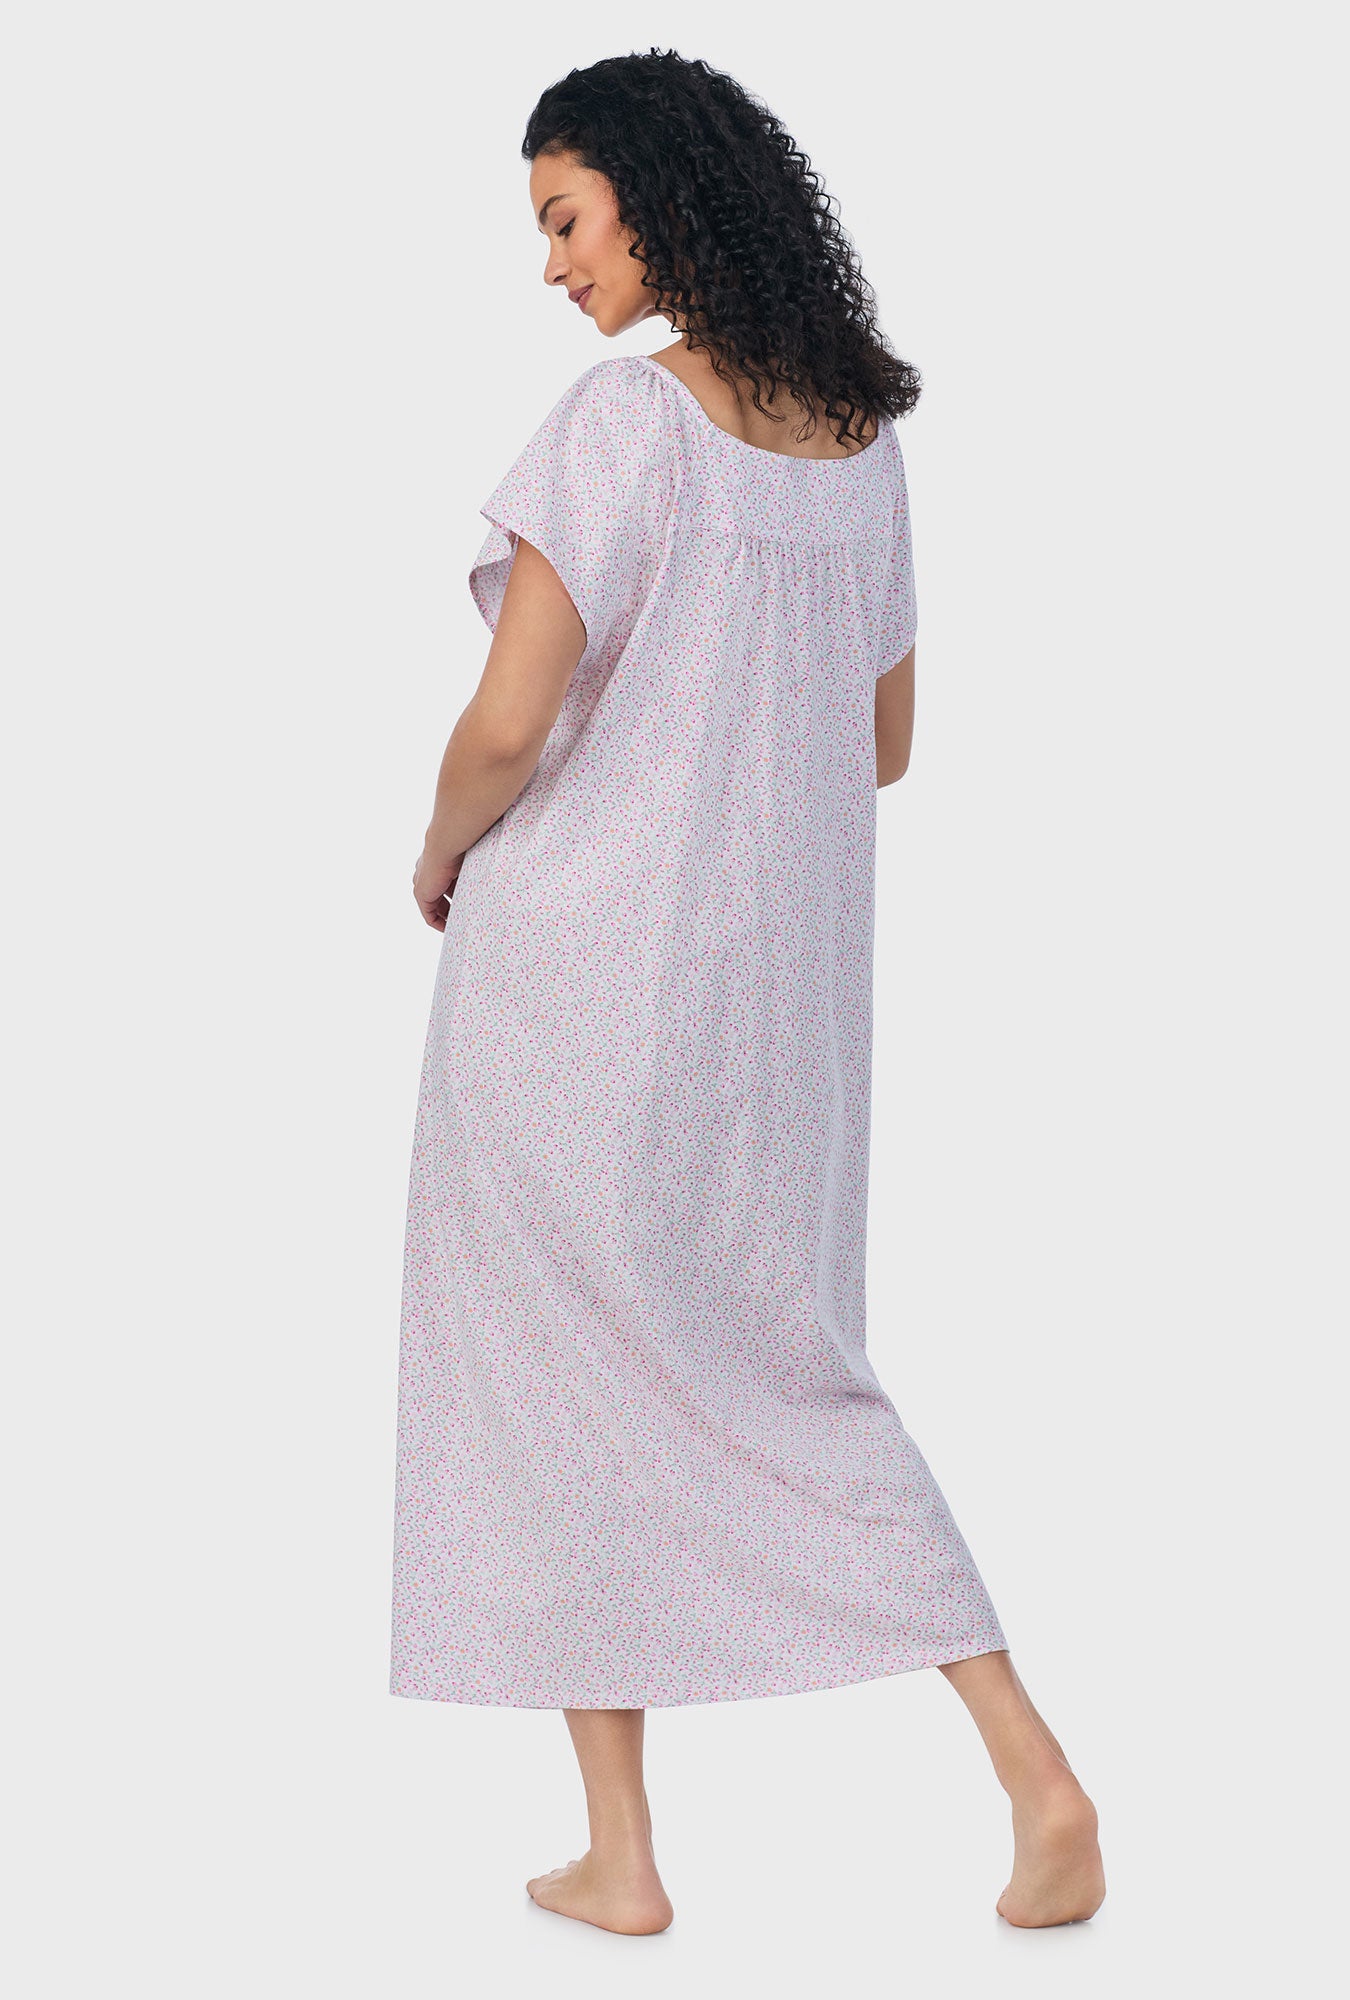 A lady wearing pink short sleeve cotton ballet plus size nightgown with tulip field print.